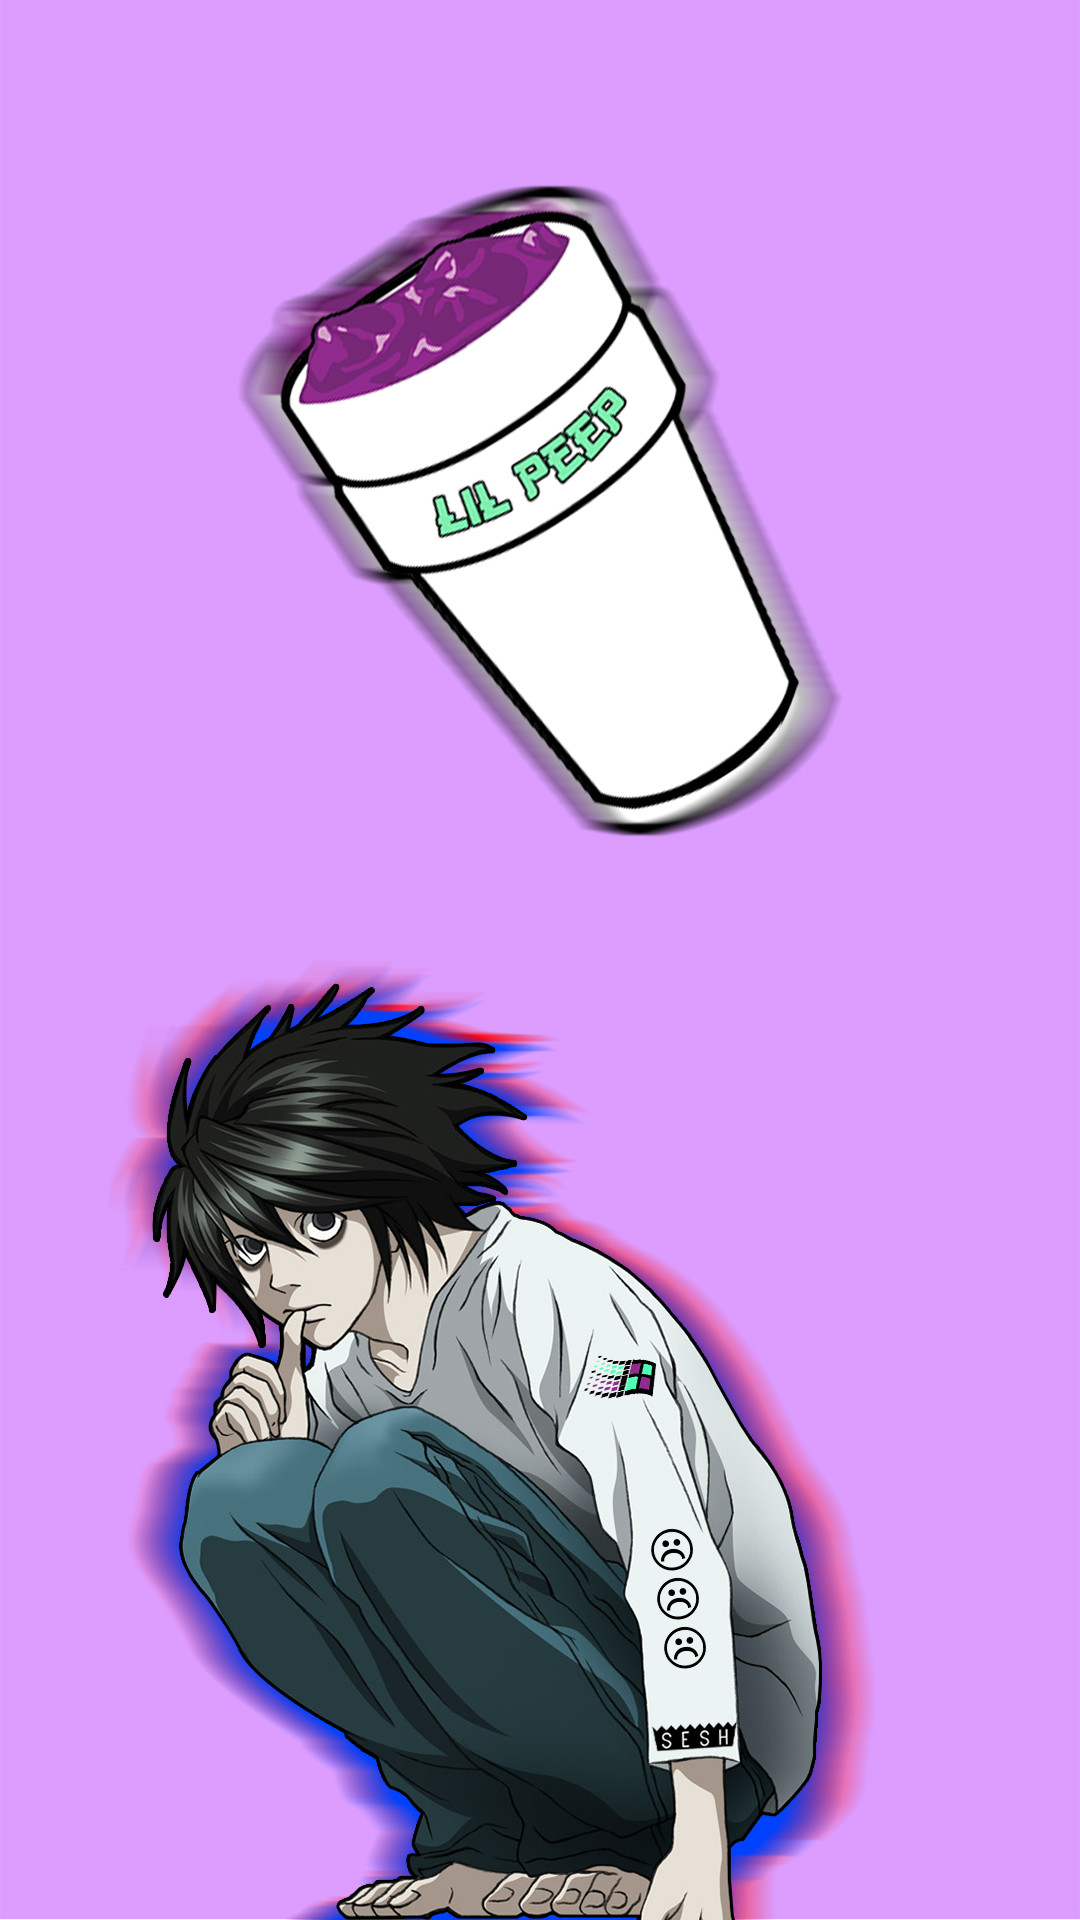 1080x1920 ... L (Death Note) ~ SBE iPhone Wallpaper by xTrayzer